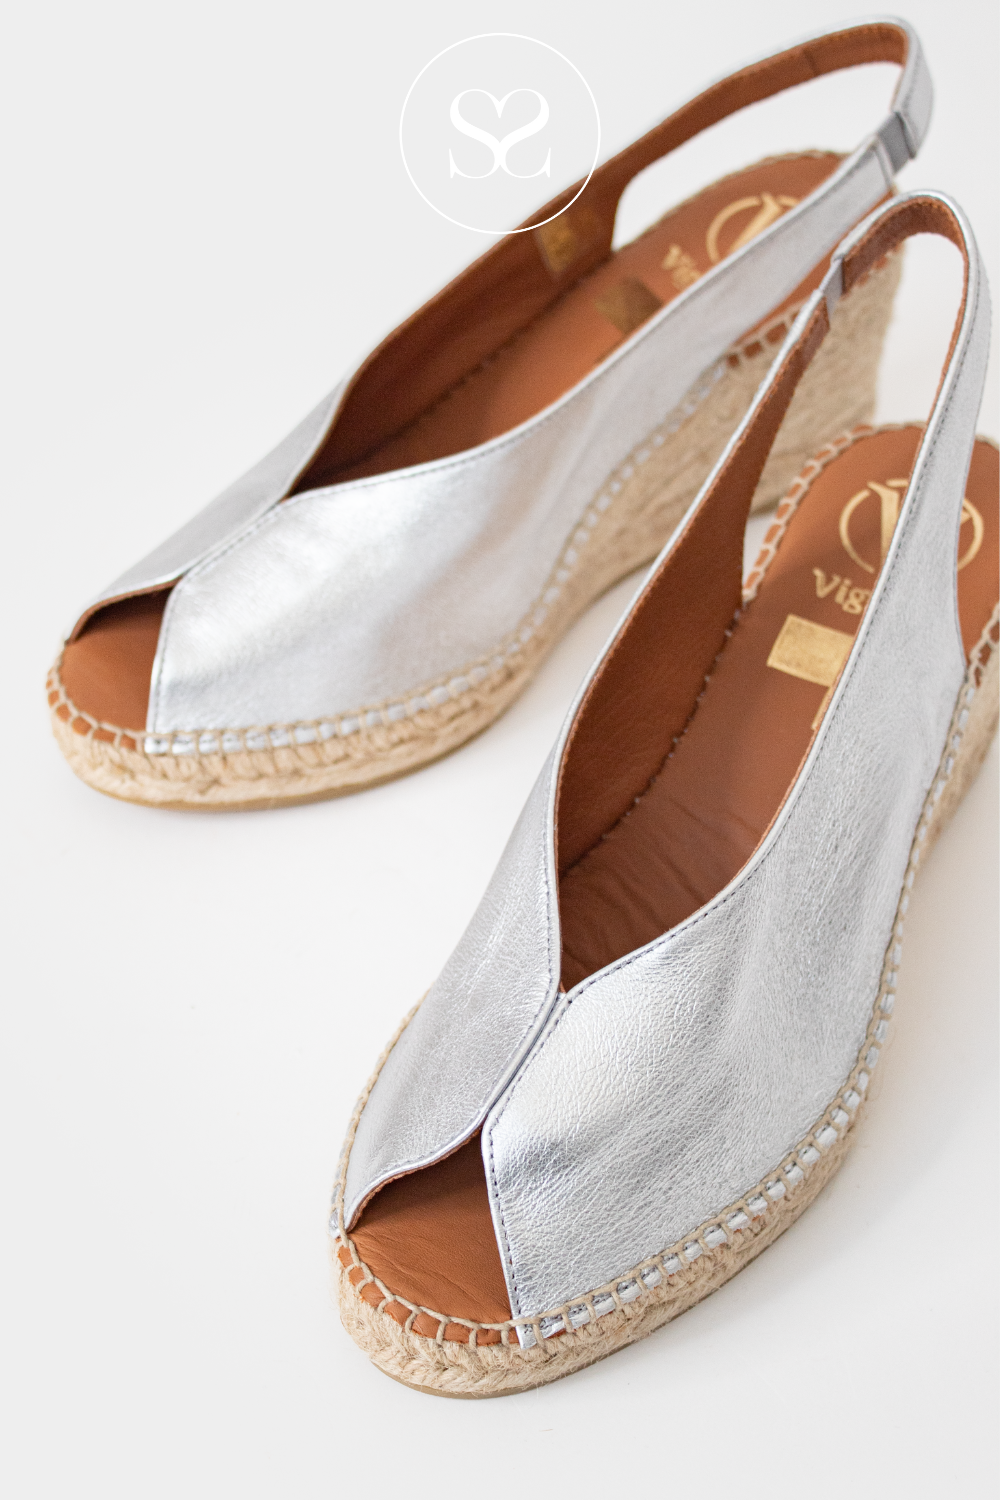 VIGUERA 2127 SILVER WEDGE ESPADRILLE SANDALS WITH PEEP TOE FRONT AND SLINGBACK HEEL